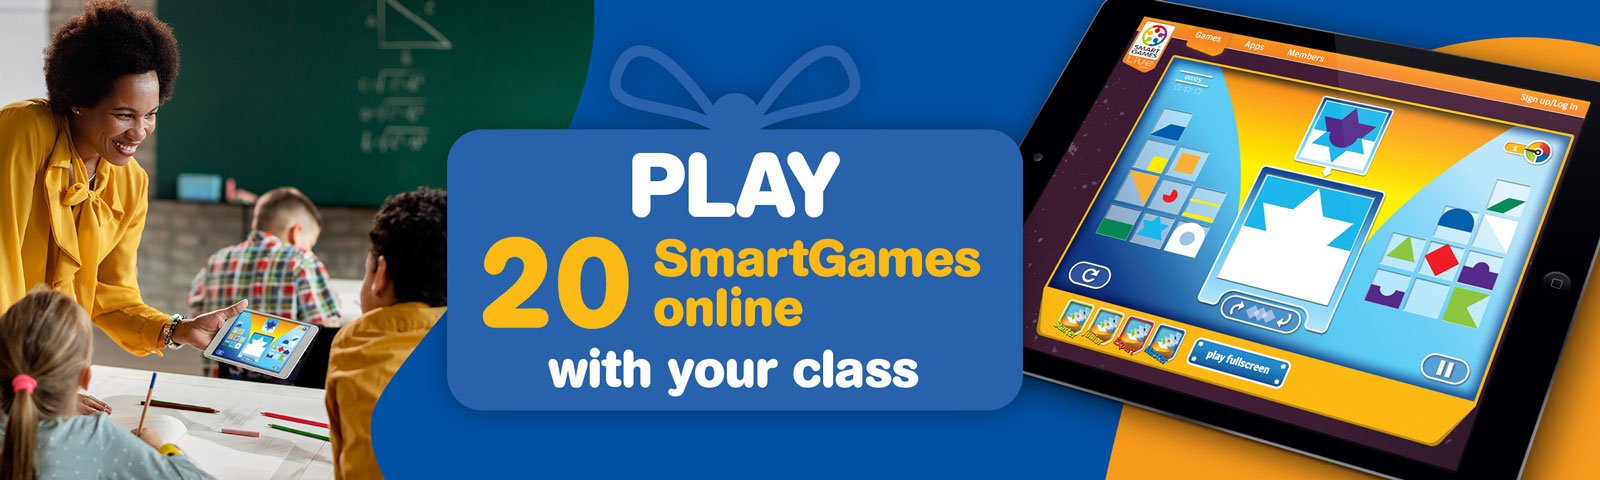 Play 20 educational SmartGames online with your class